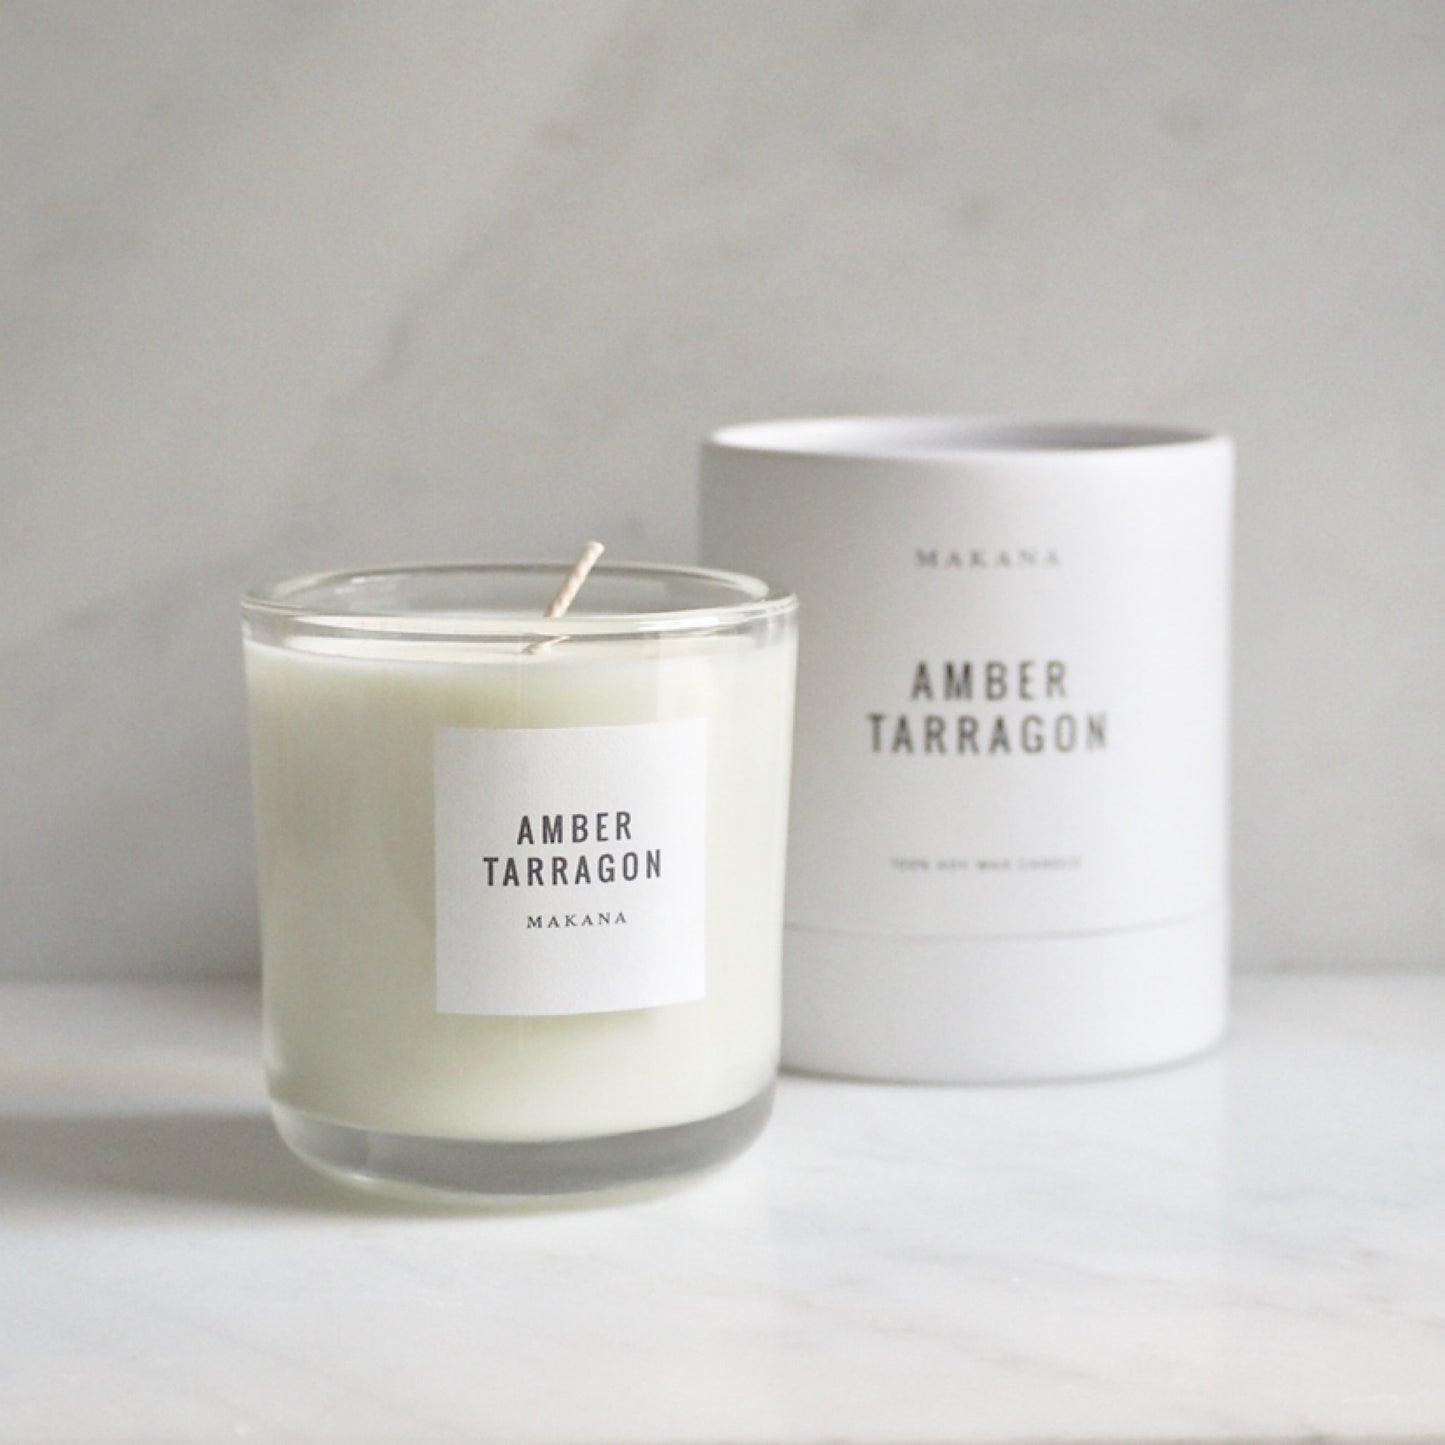 By Makana Candles. Amber Tarragon Candle: Resinous amber accented by vanilla and fennel, unveiling a heart of fresh tarragon, tuberose and basil, and finished with an accord of sensuous woods. Hand-poured in-house in small batches using simple, clean ingredients.